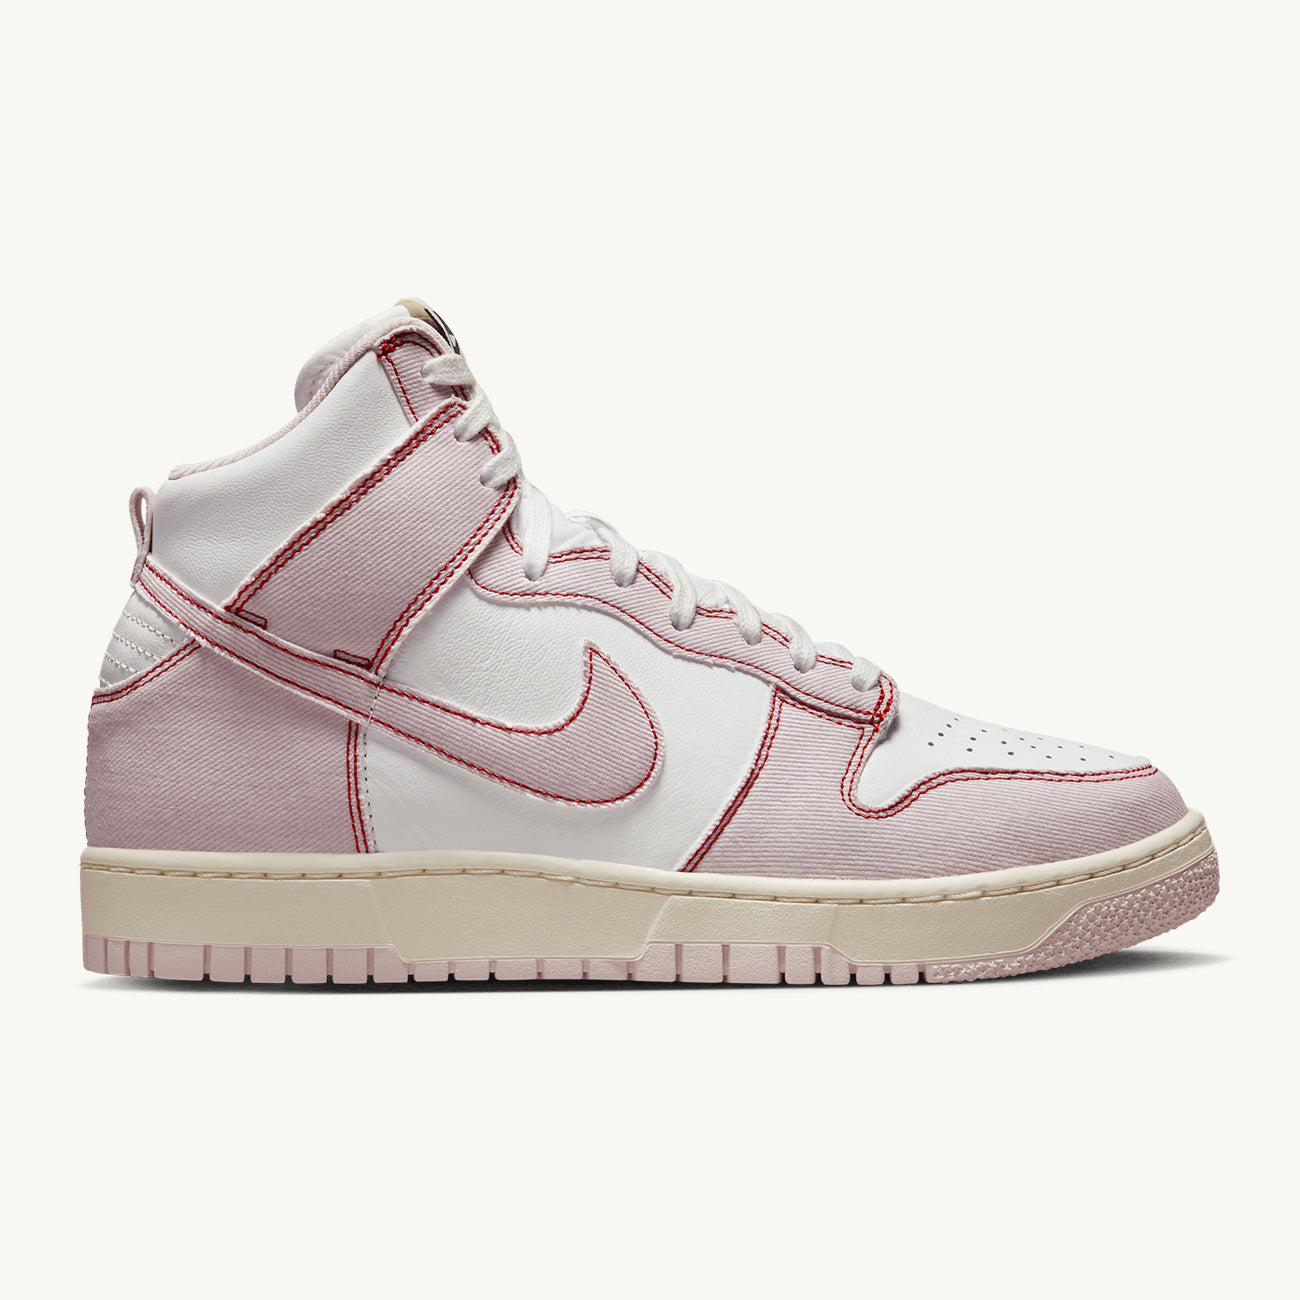 Dunk High 1985 - Summit White/Barely Rose/University Red